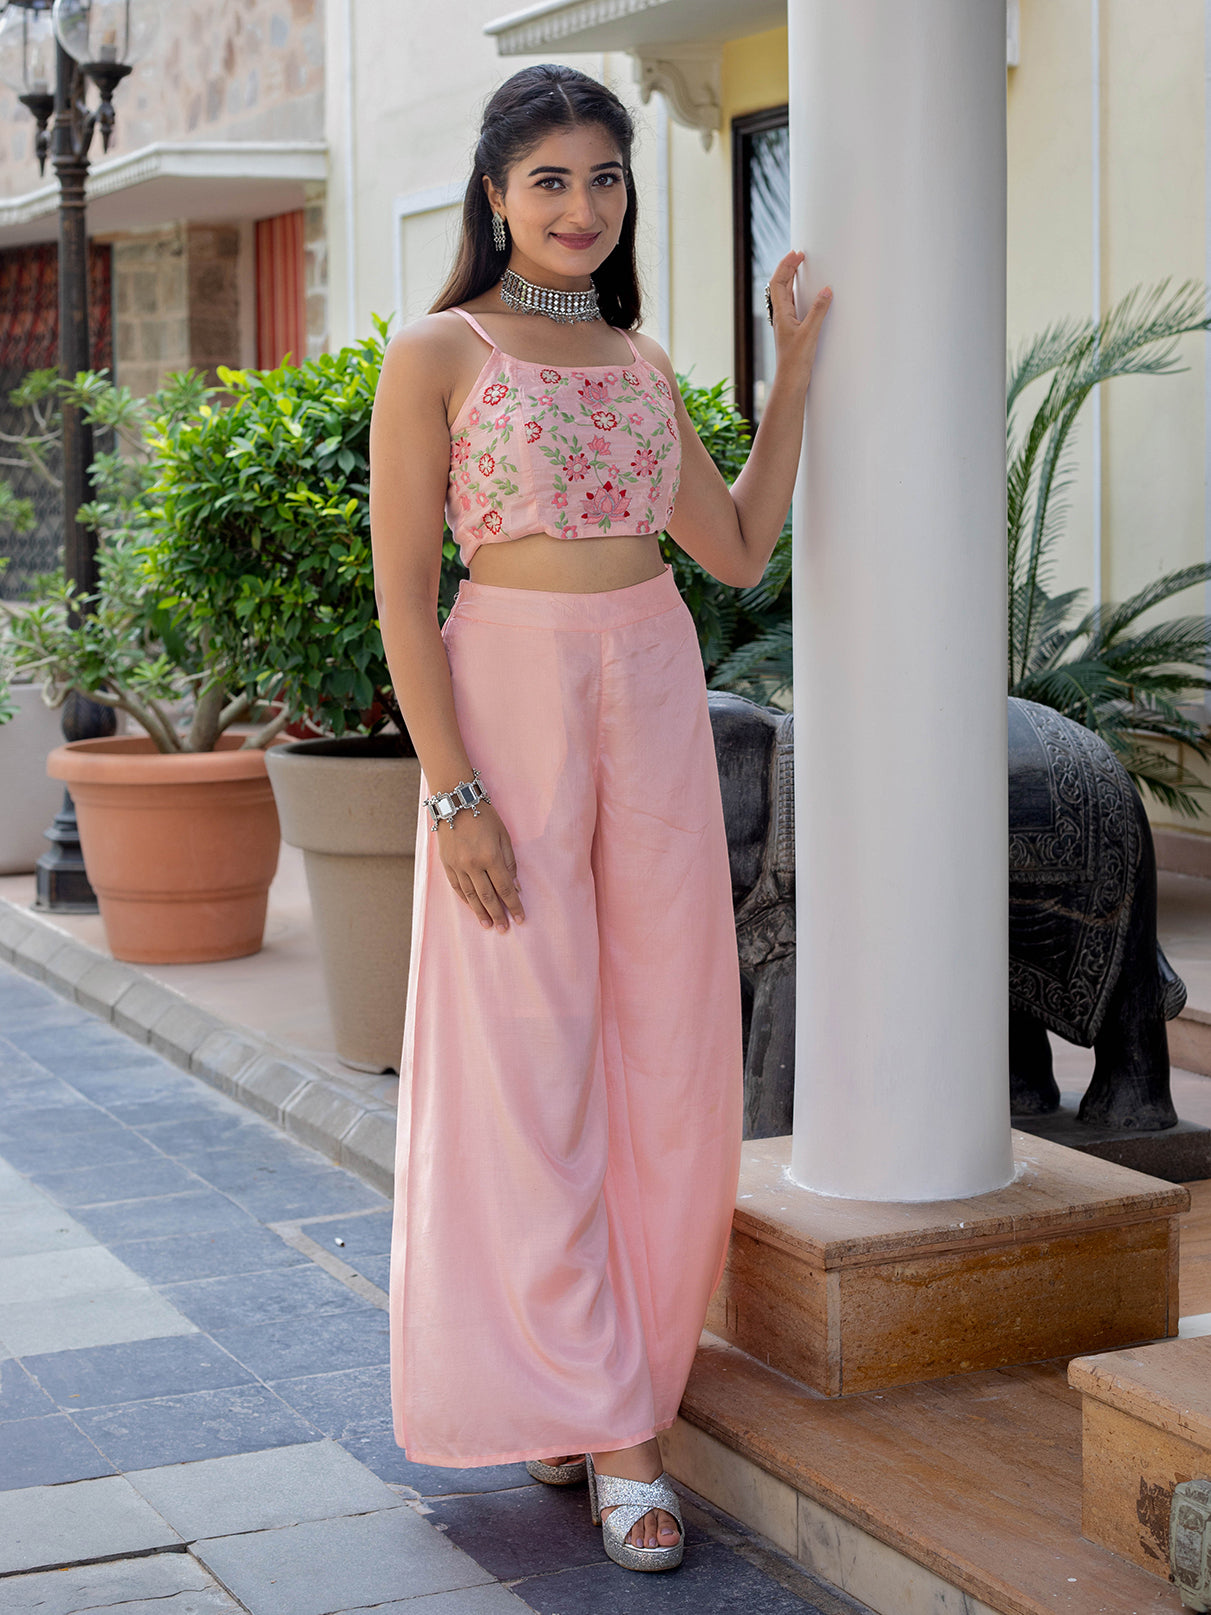 introducing-our-peach-pink-co-ord-set-featuring-vibrant-floral-embroidery-on-the-crop-top-embrace-the-beauty-of-colorful-blooms-in-this-chic-ensemble